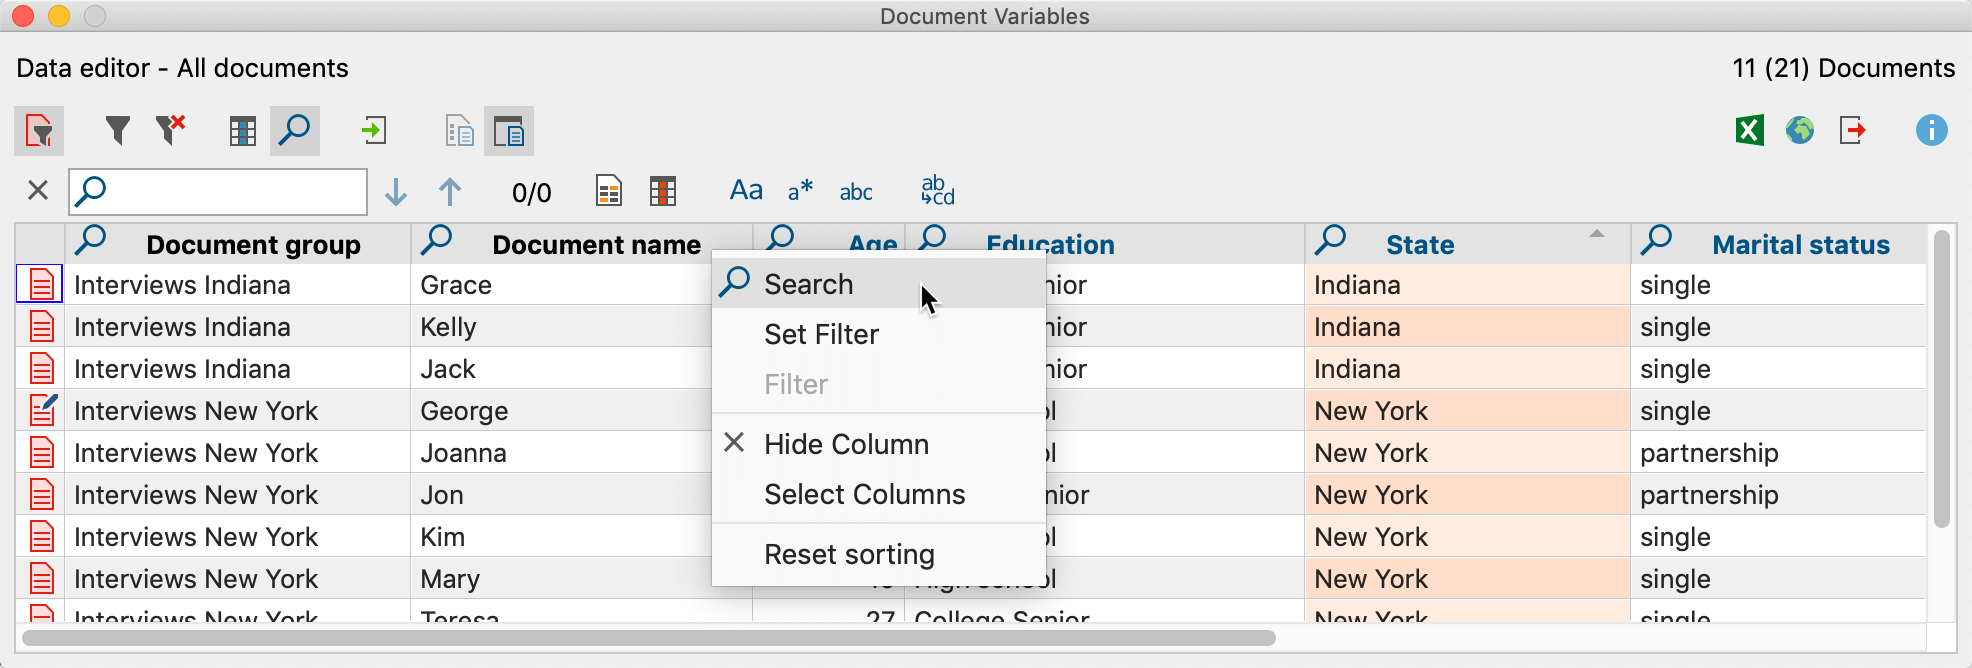 Restrict search to one column